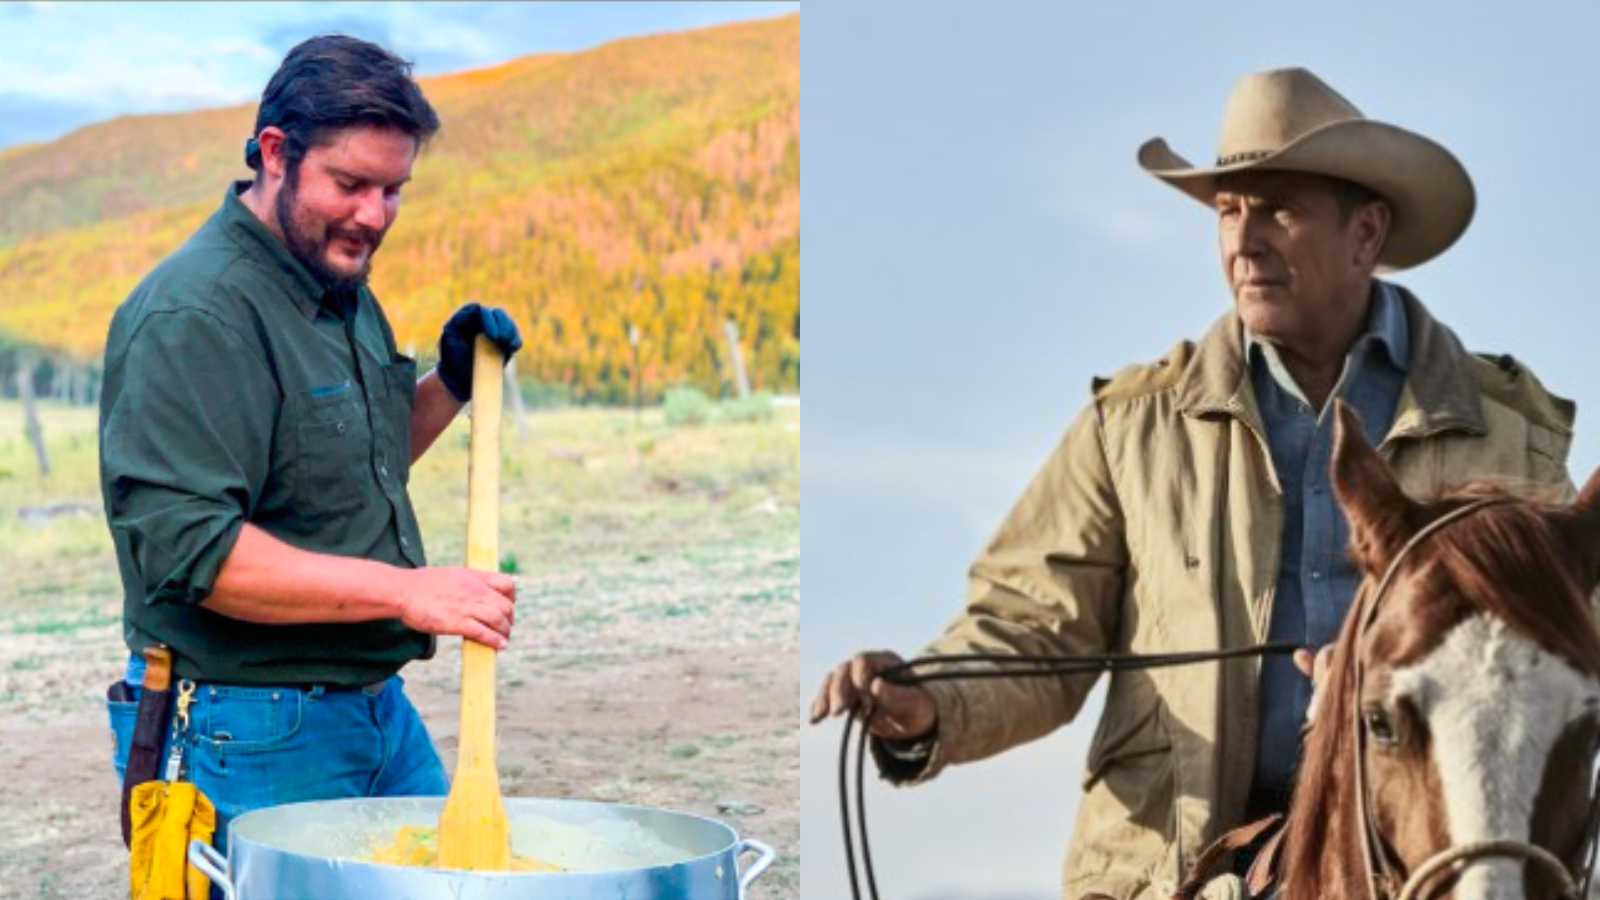 Yellowstone' chef shares Kevin Costner's favorite meals, claims